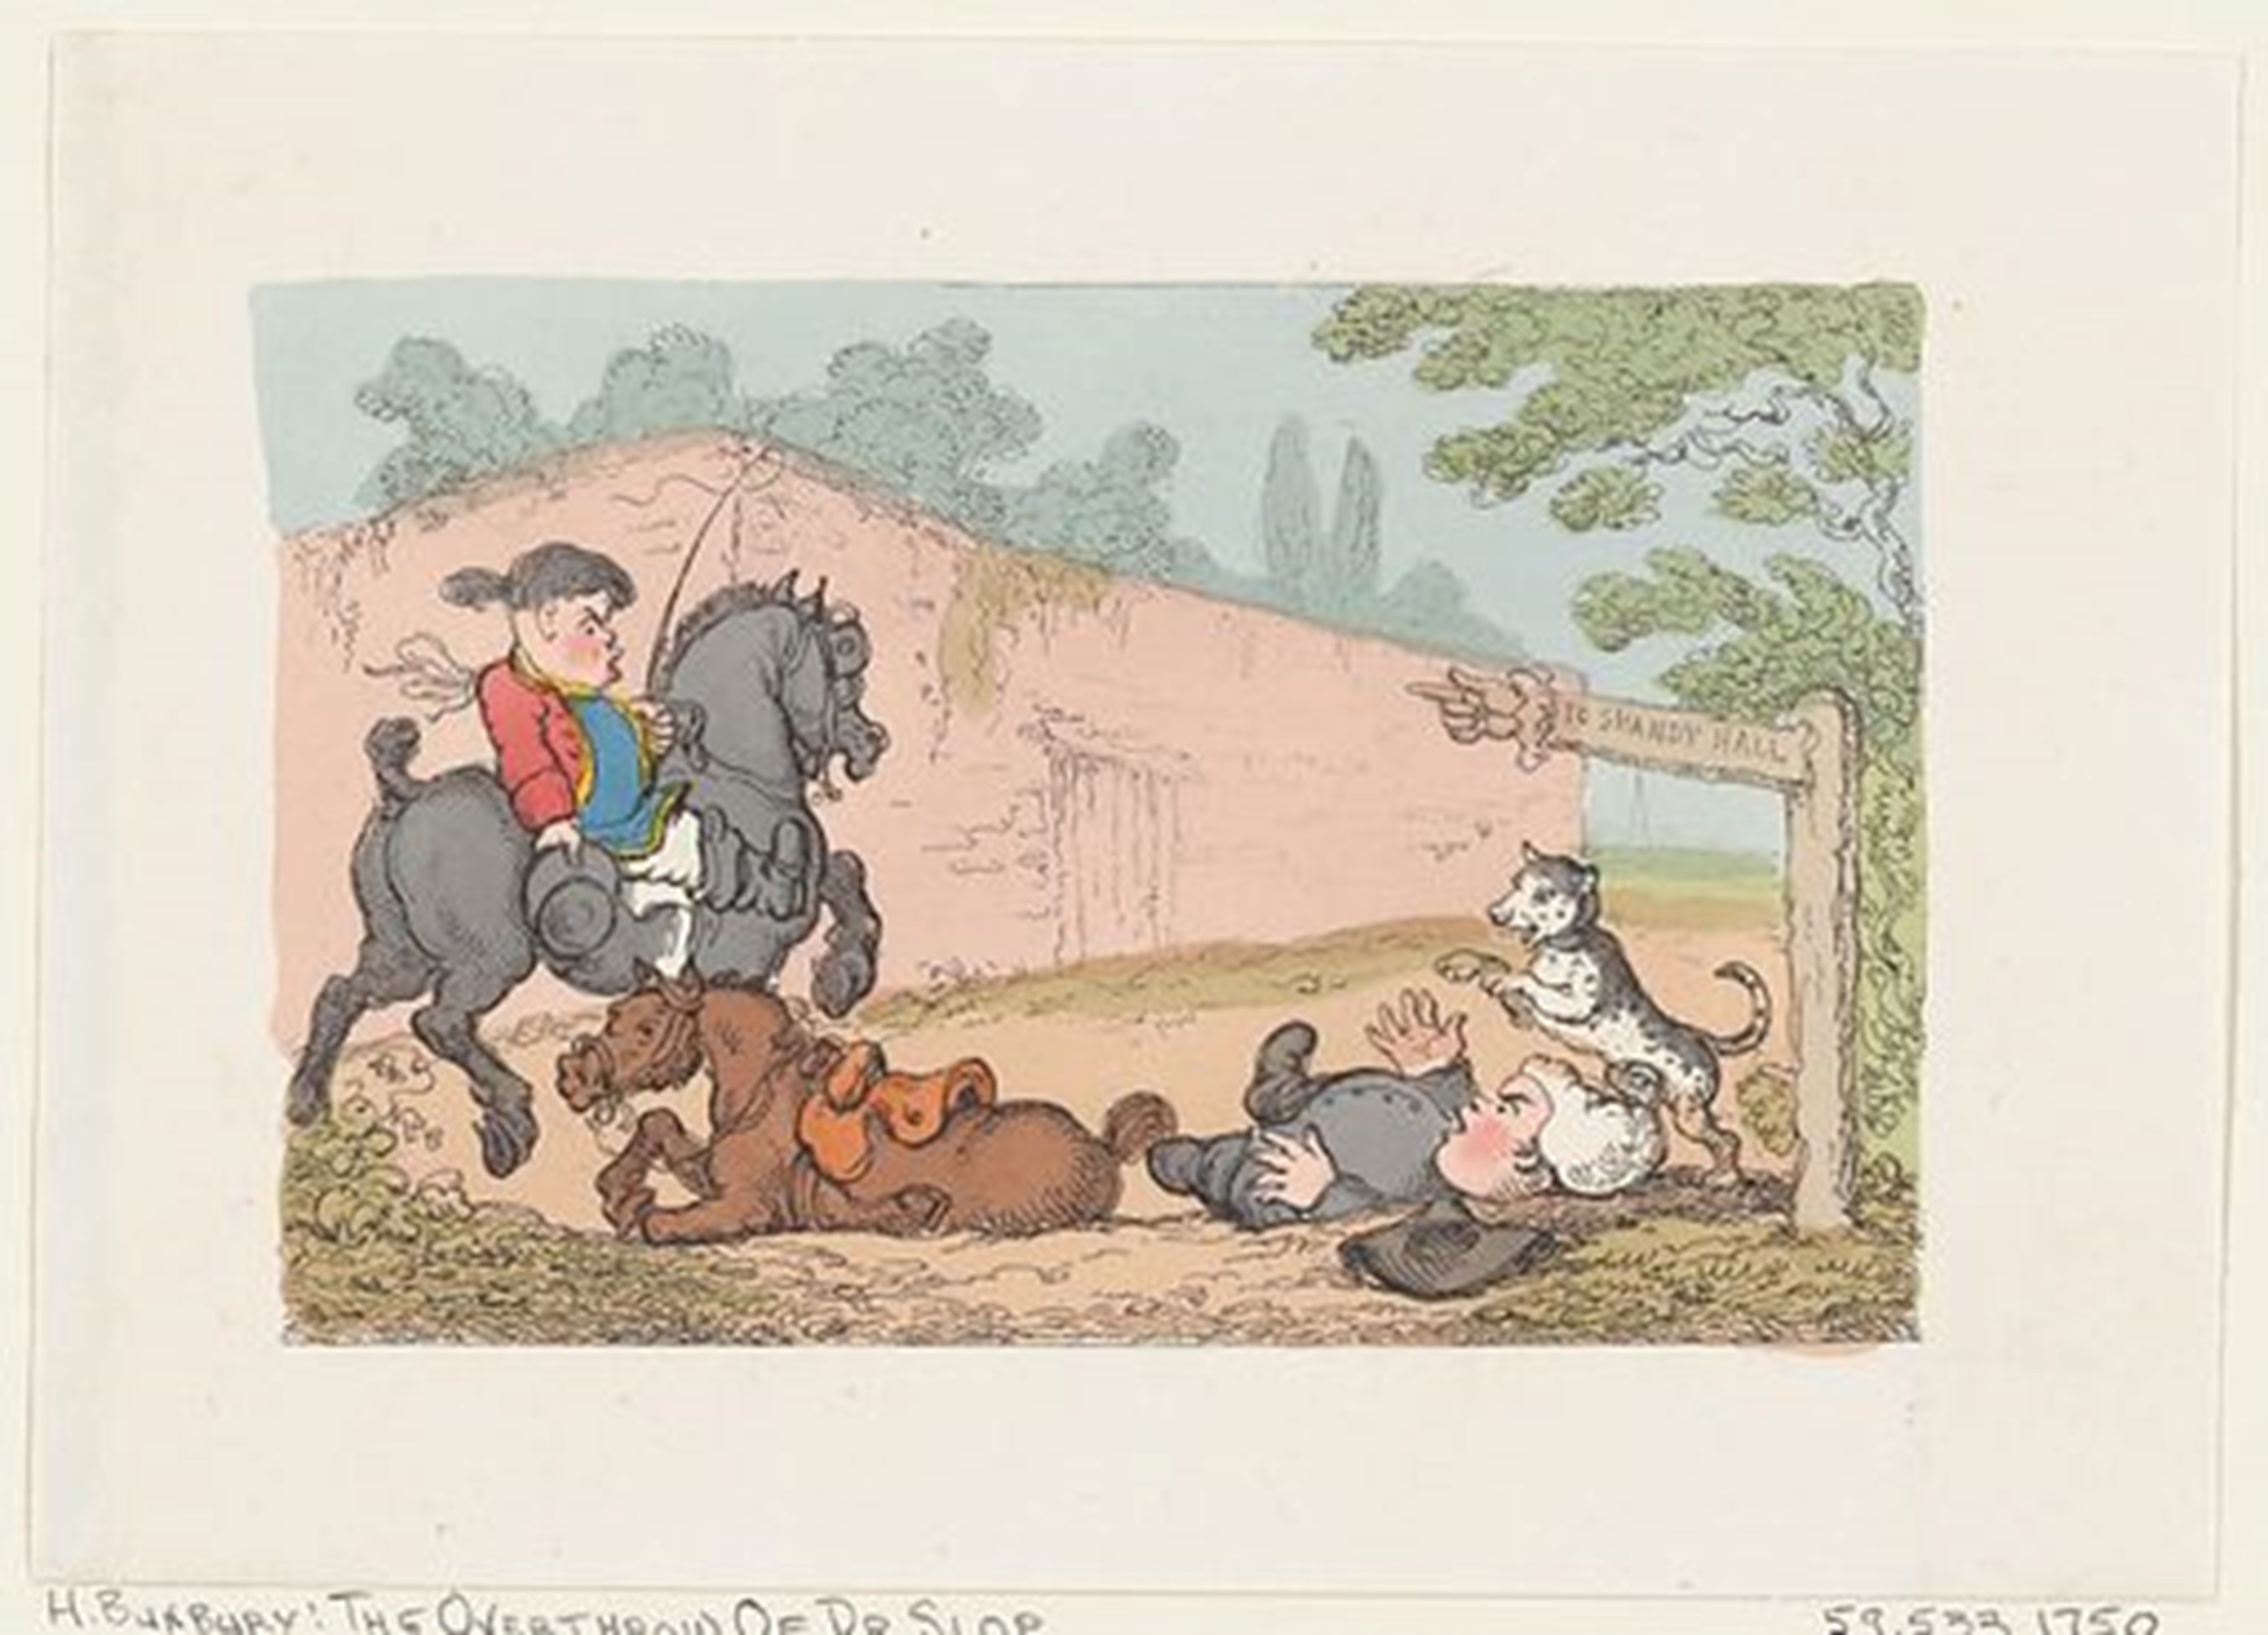 'The Overthrow of Dr Slop' (Tristram Shandy).  C. 1803 by hand coloured etching by Thomas Rowlandson